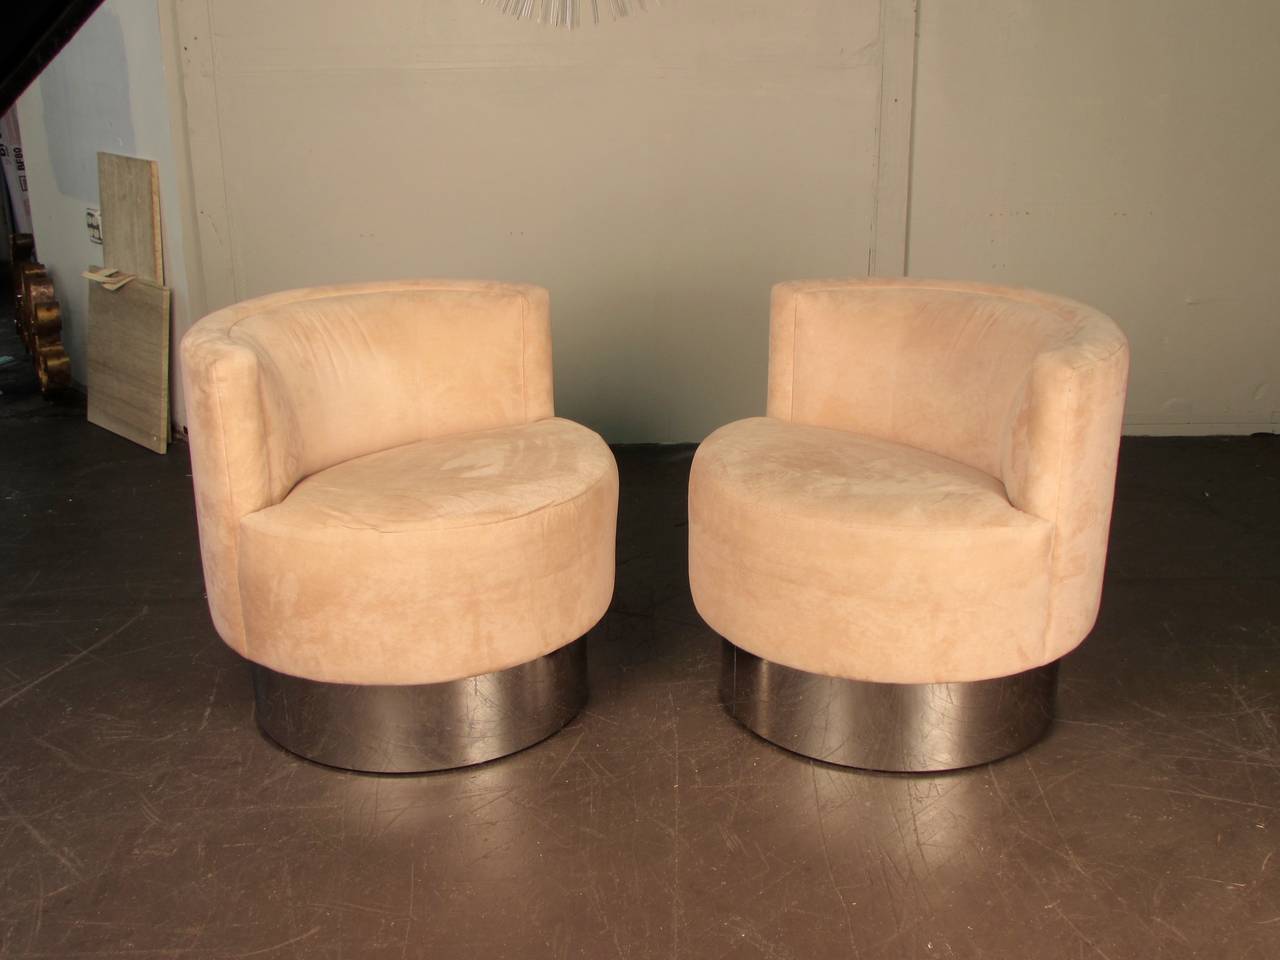 Pair of swivel lounge chairs on smoked chrome bases, five chairs available. These chairs are very well made and heavy. Chrome bases are in excellent condition. Velvet upholstery needs to be redone. Maker is unknown. In the style of Leon Rosen, Milo